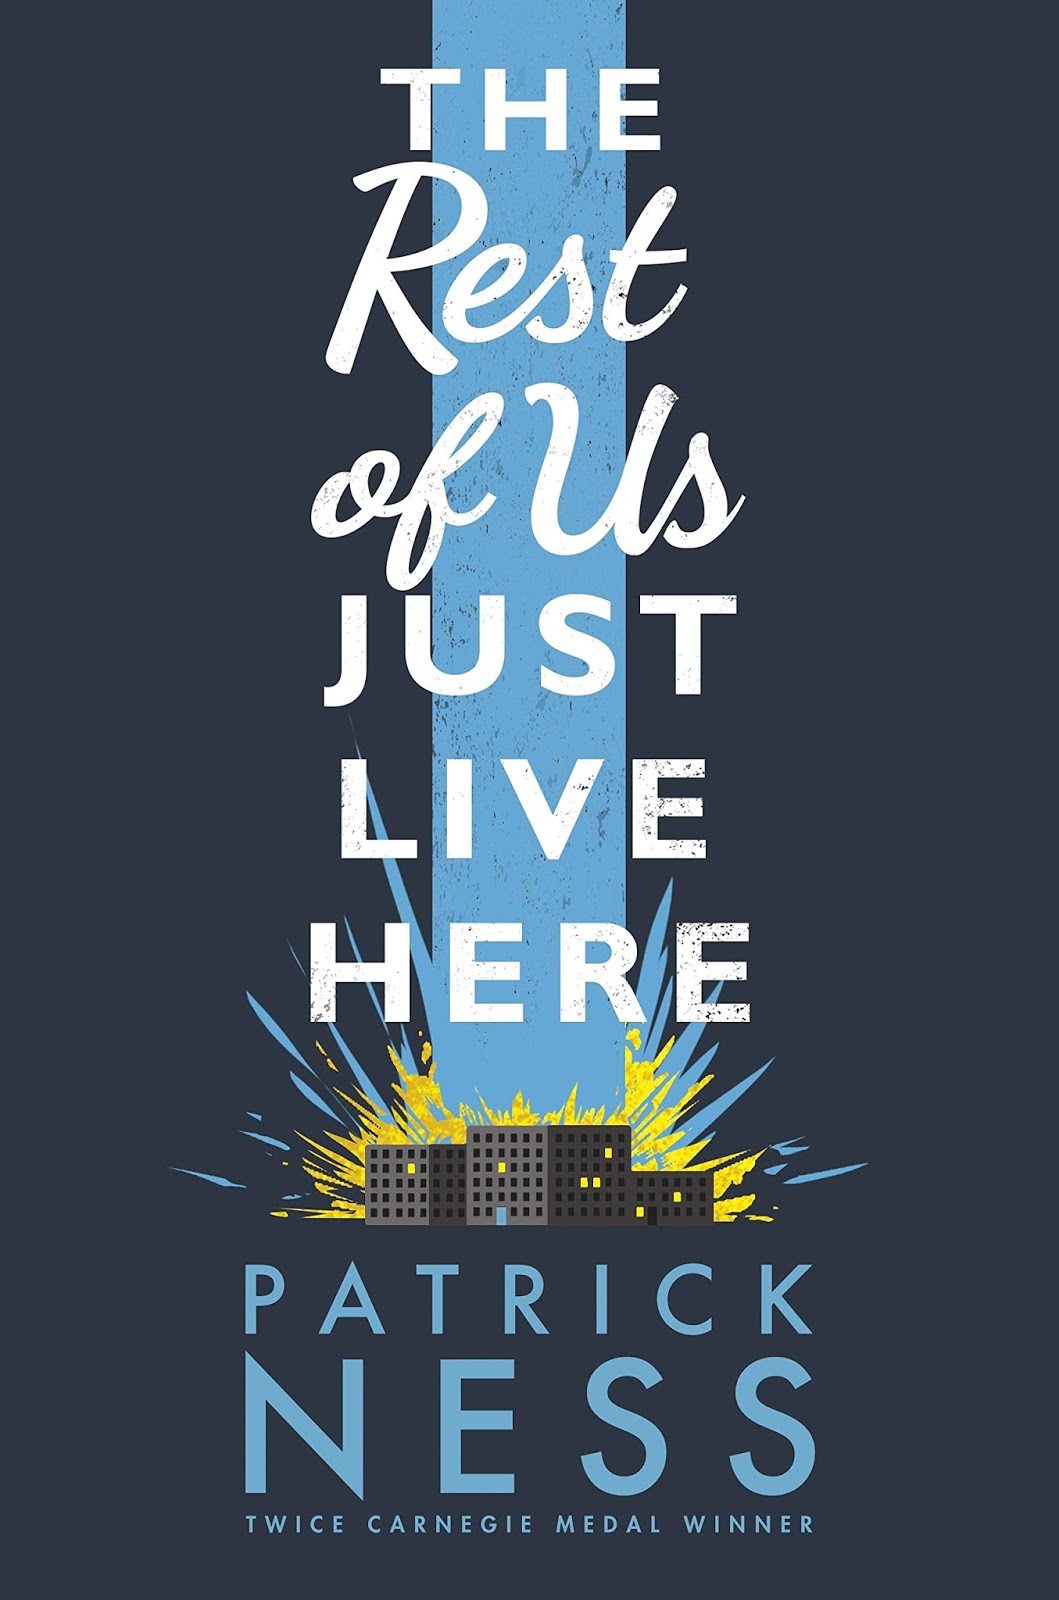 Who live here. The rest of us just Live here. Patrick Ness. Just Living красива. Rest.